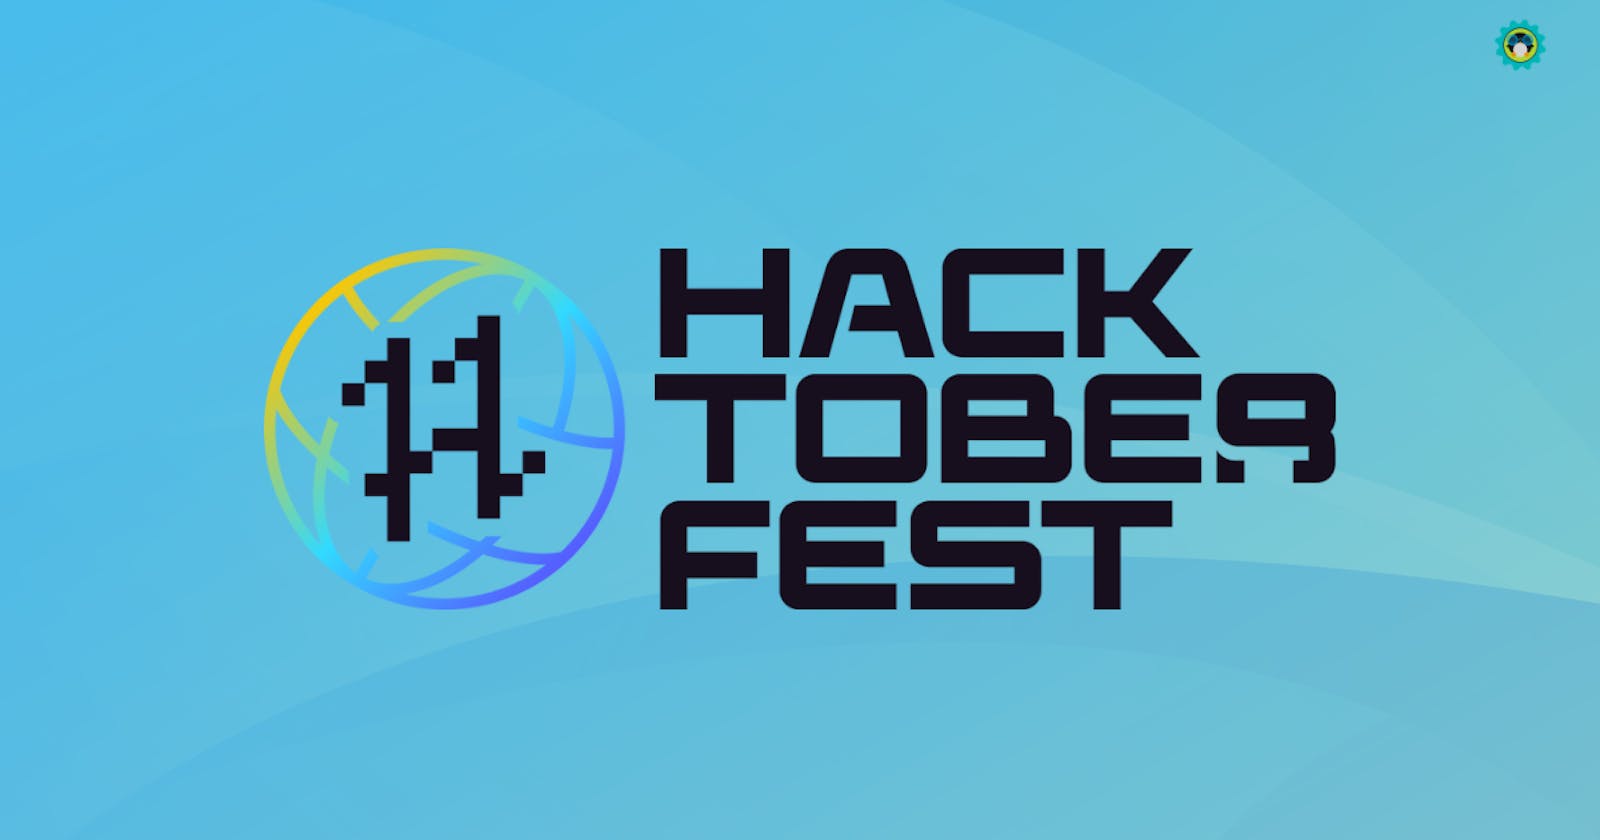 Hacktoberfest: A Month of Open Source Contributions